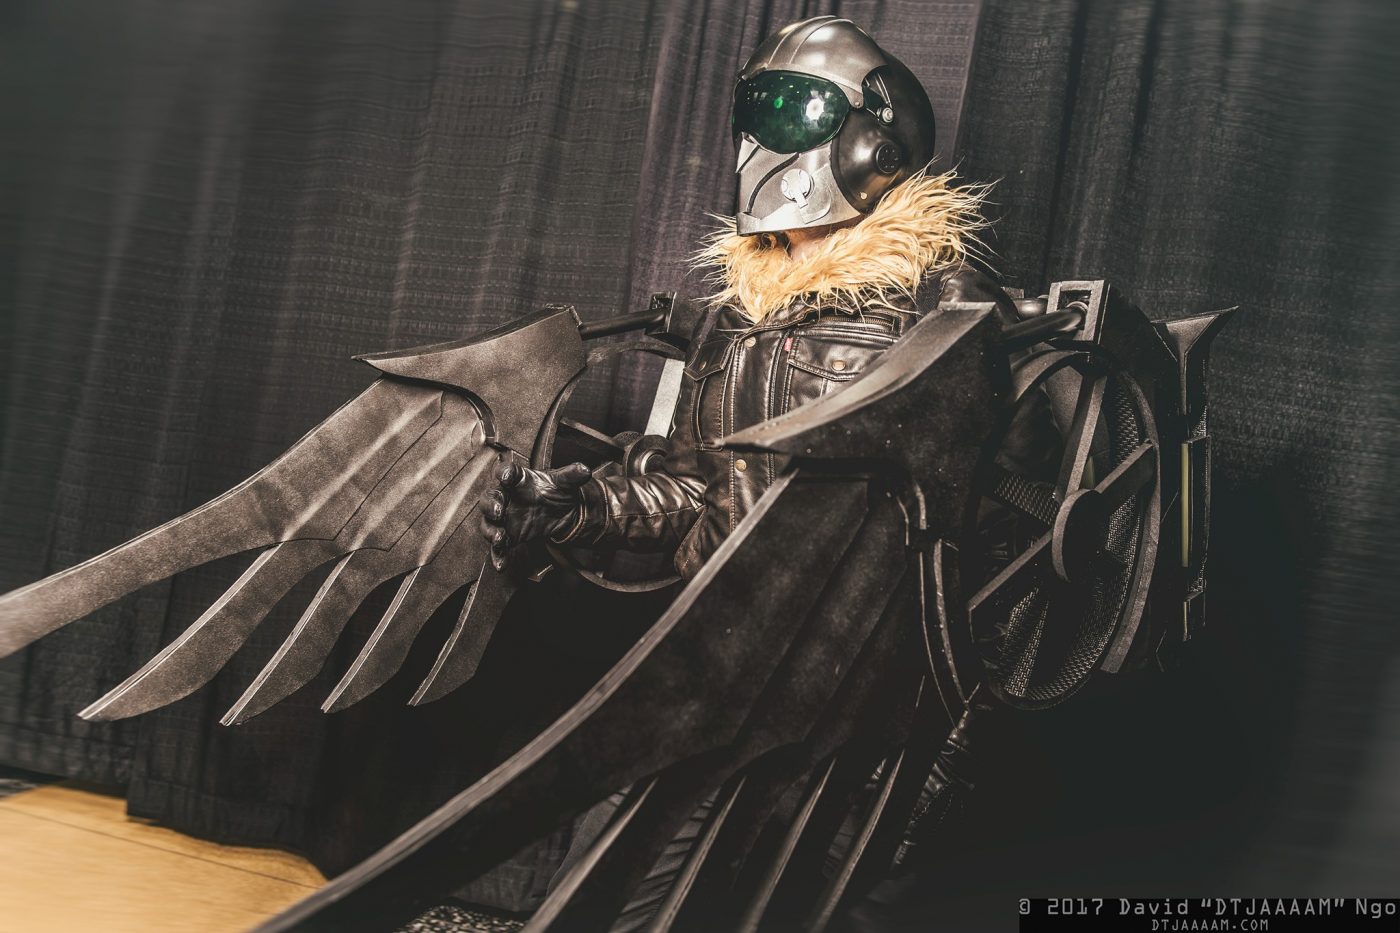 Spider-Man: Homecoming: Vulture cosplay by Black Zero | AIPT1400 x 933